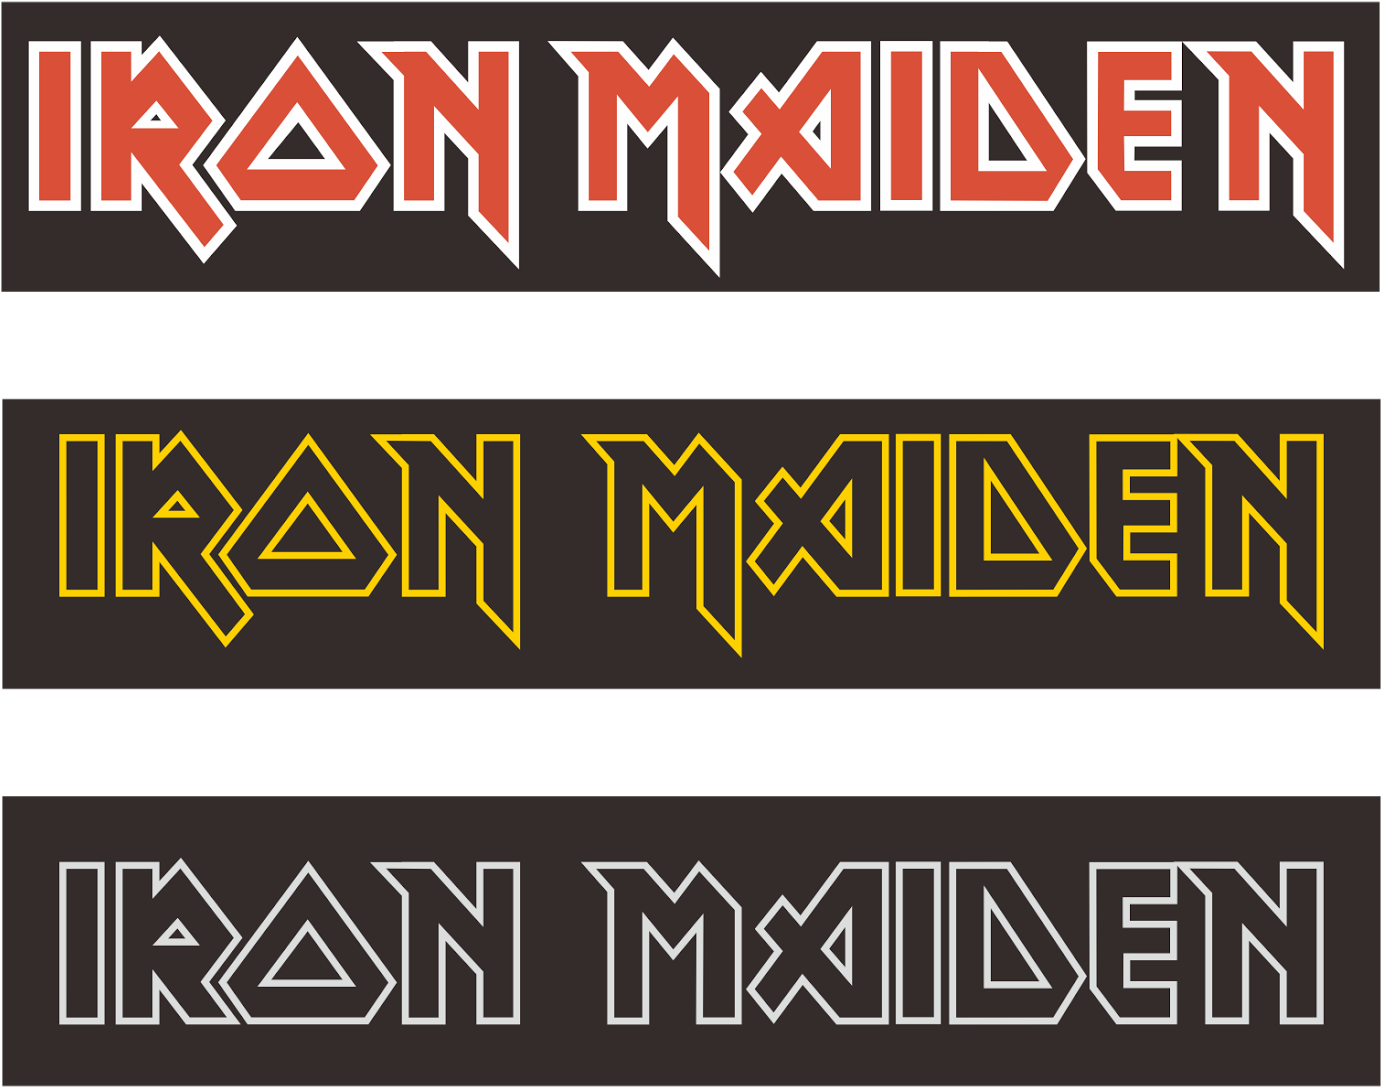 Iron Maiden Logo Png Clipart Large Size Png Image Pikpng | Images and ...